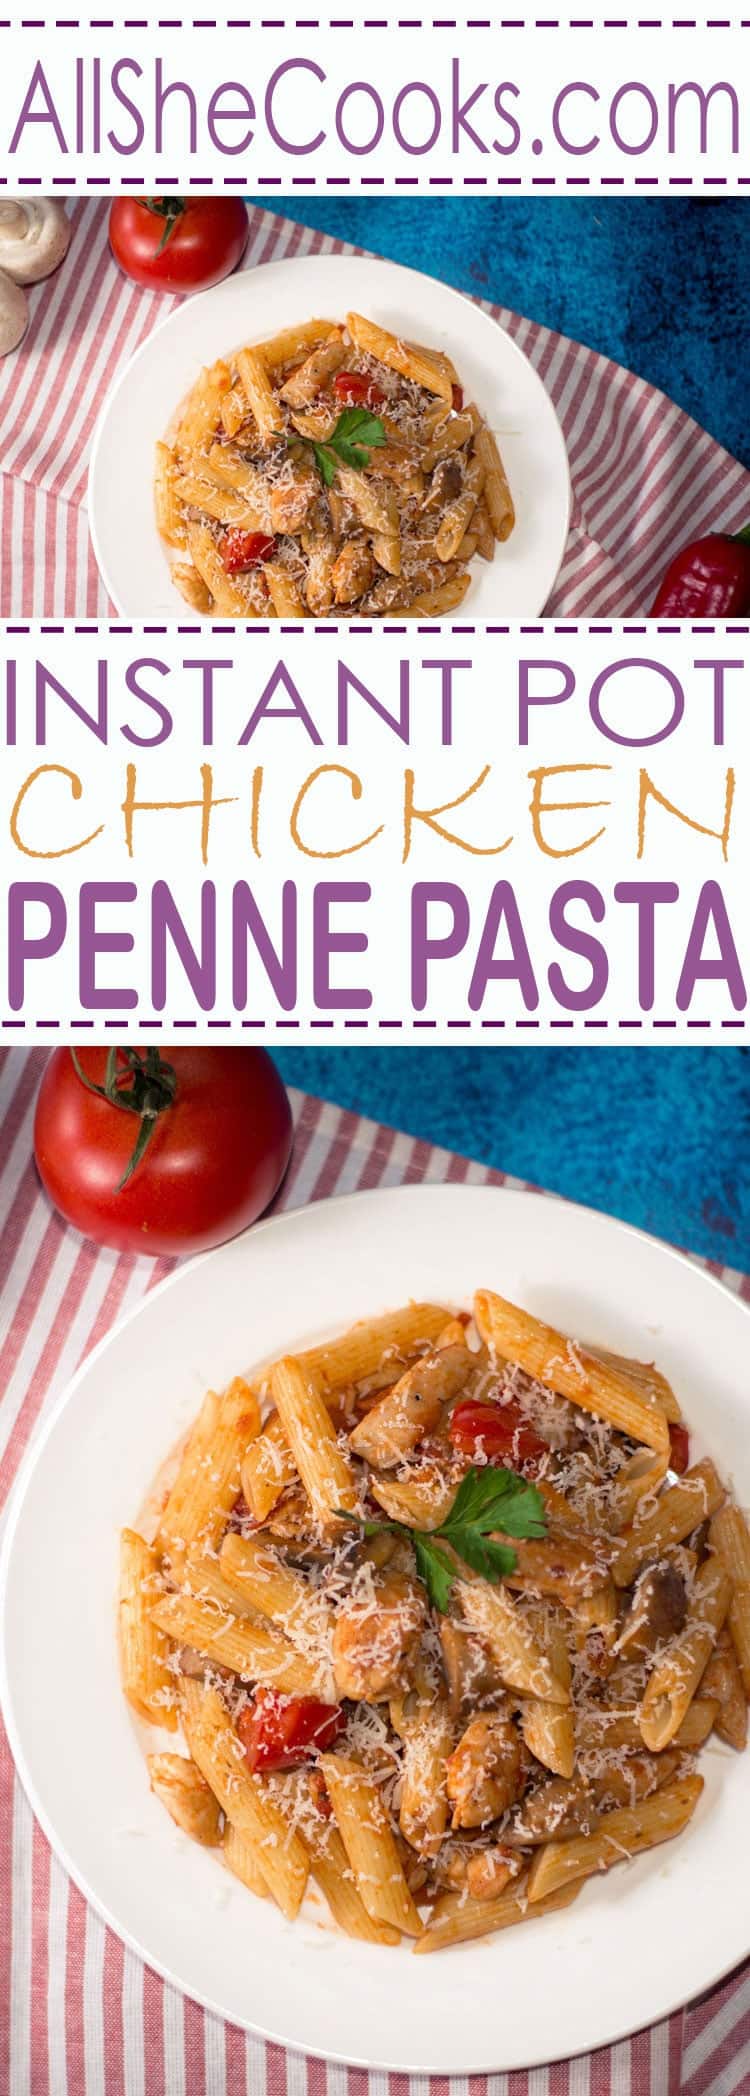 instant-pot-chicken-penne-pasta-recipe - All She Cooks